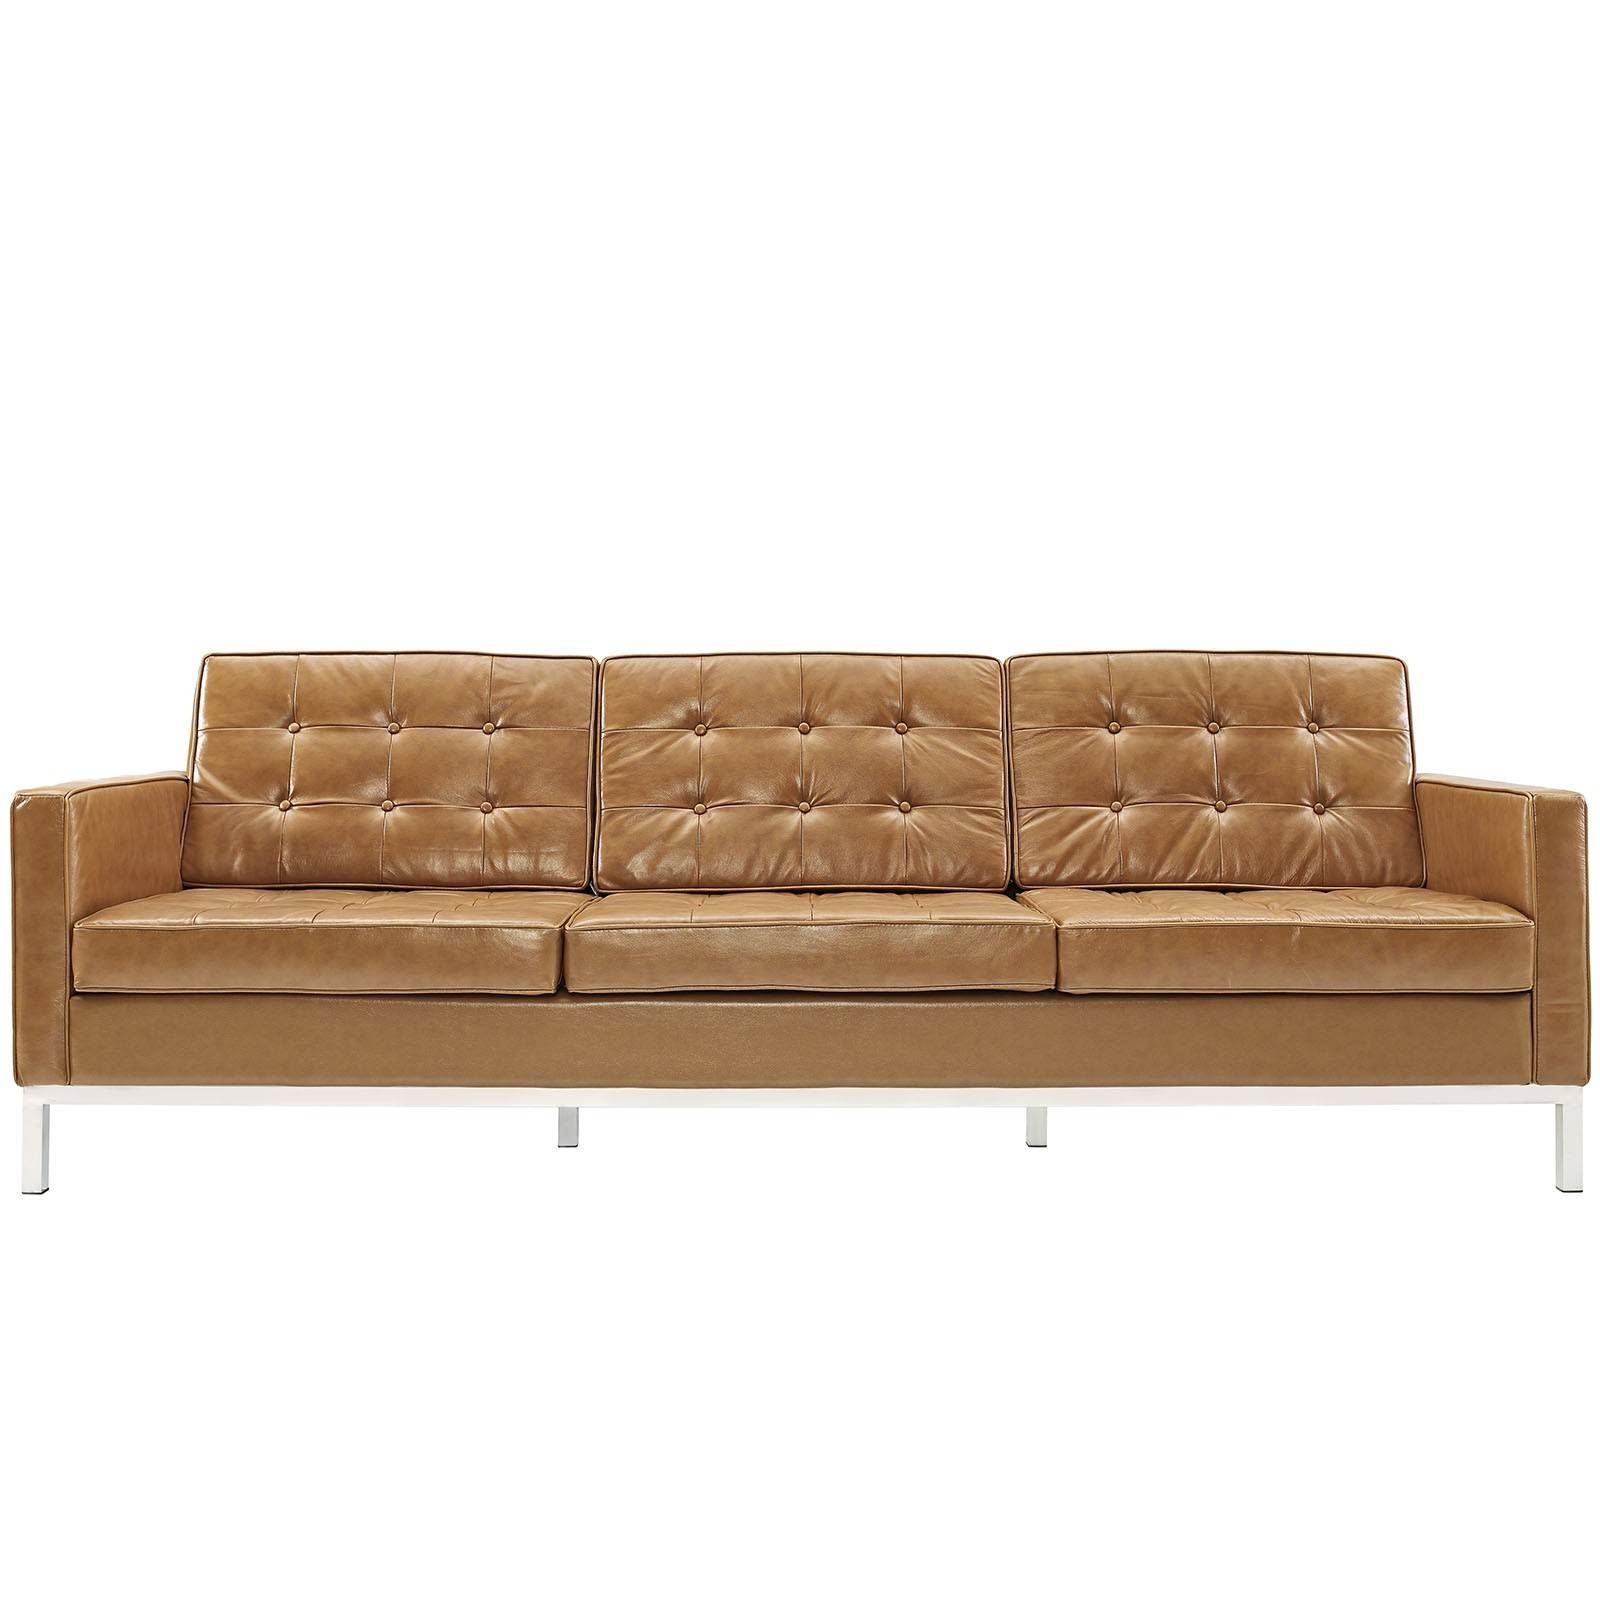 Fresh Florence Knoll Sofa Bed #14203 Regarding Florence Knoll Leather Sofas (View 4 of 25)